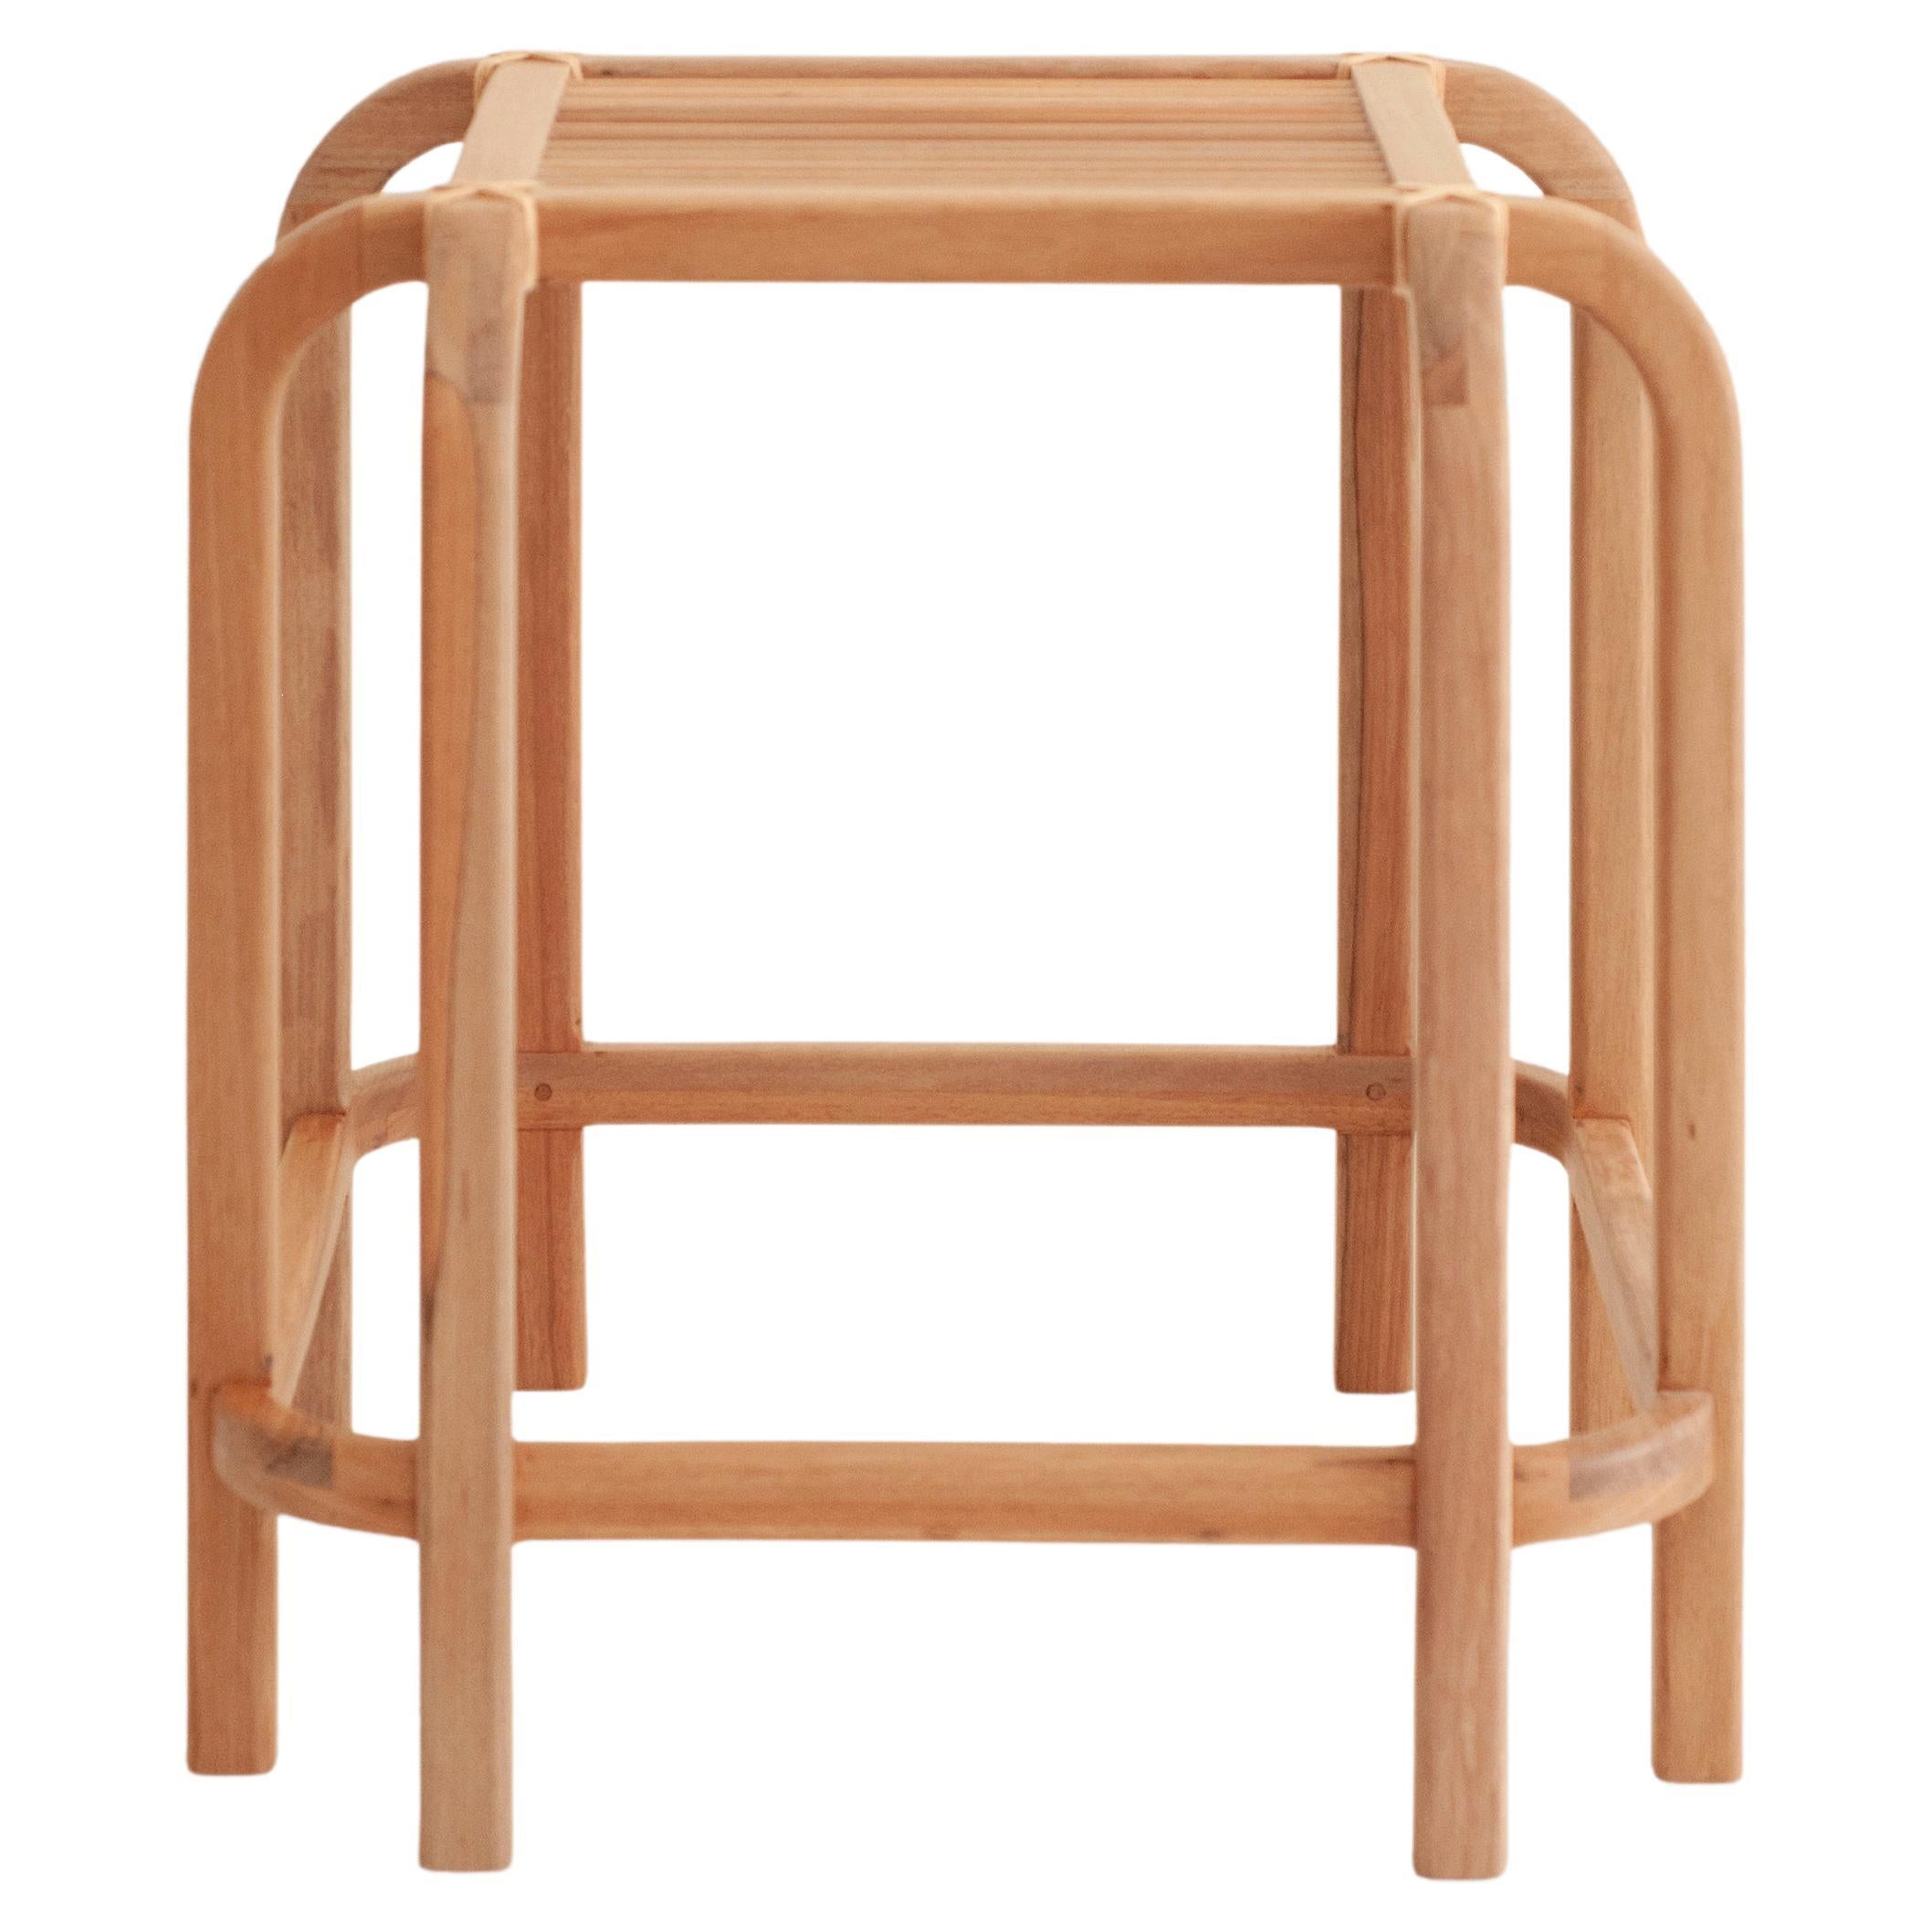 Embira High Stool: made in Brazil with pink jequitba wood and natural dyed yarns For Sale